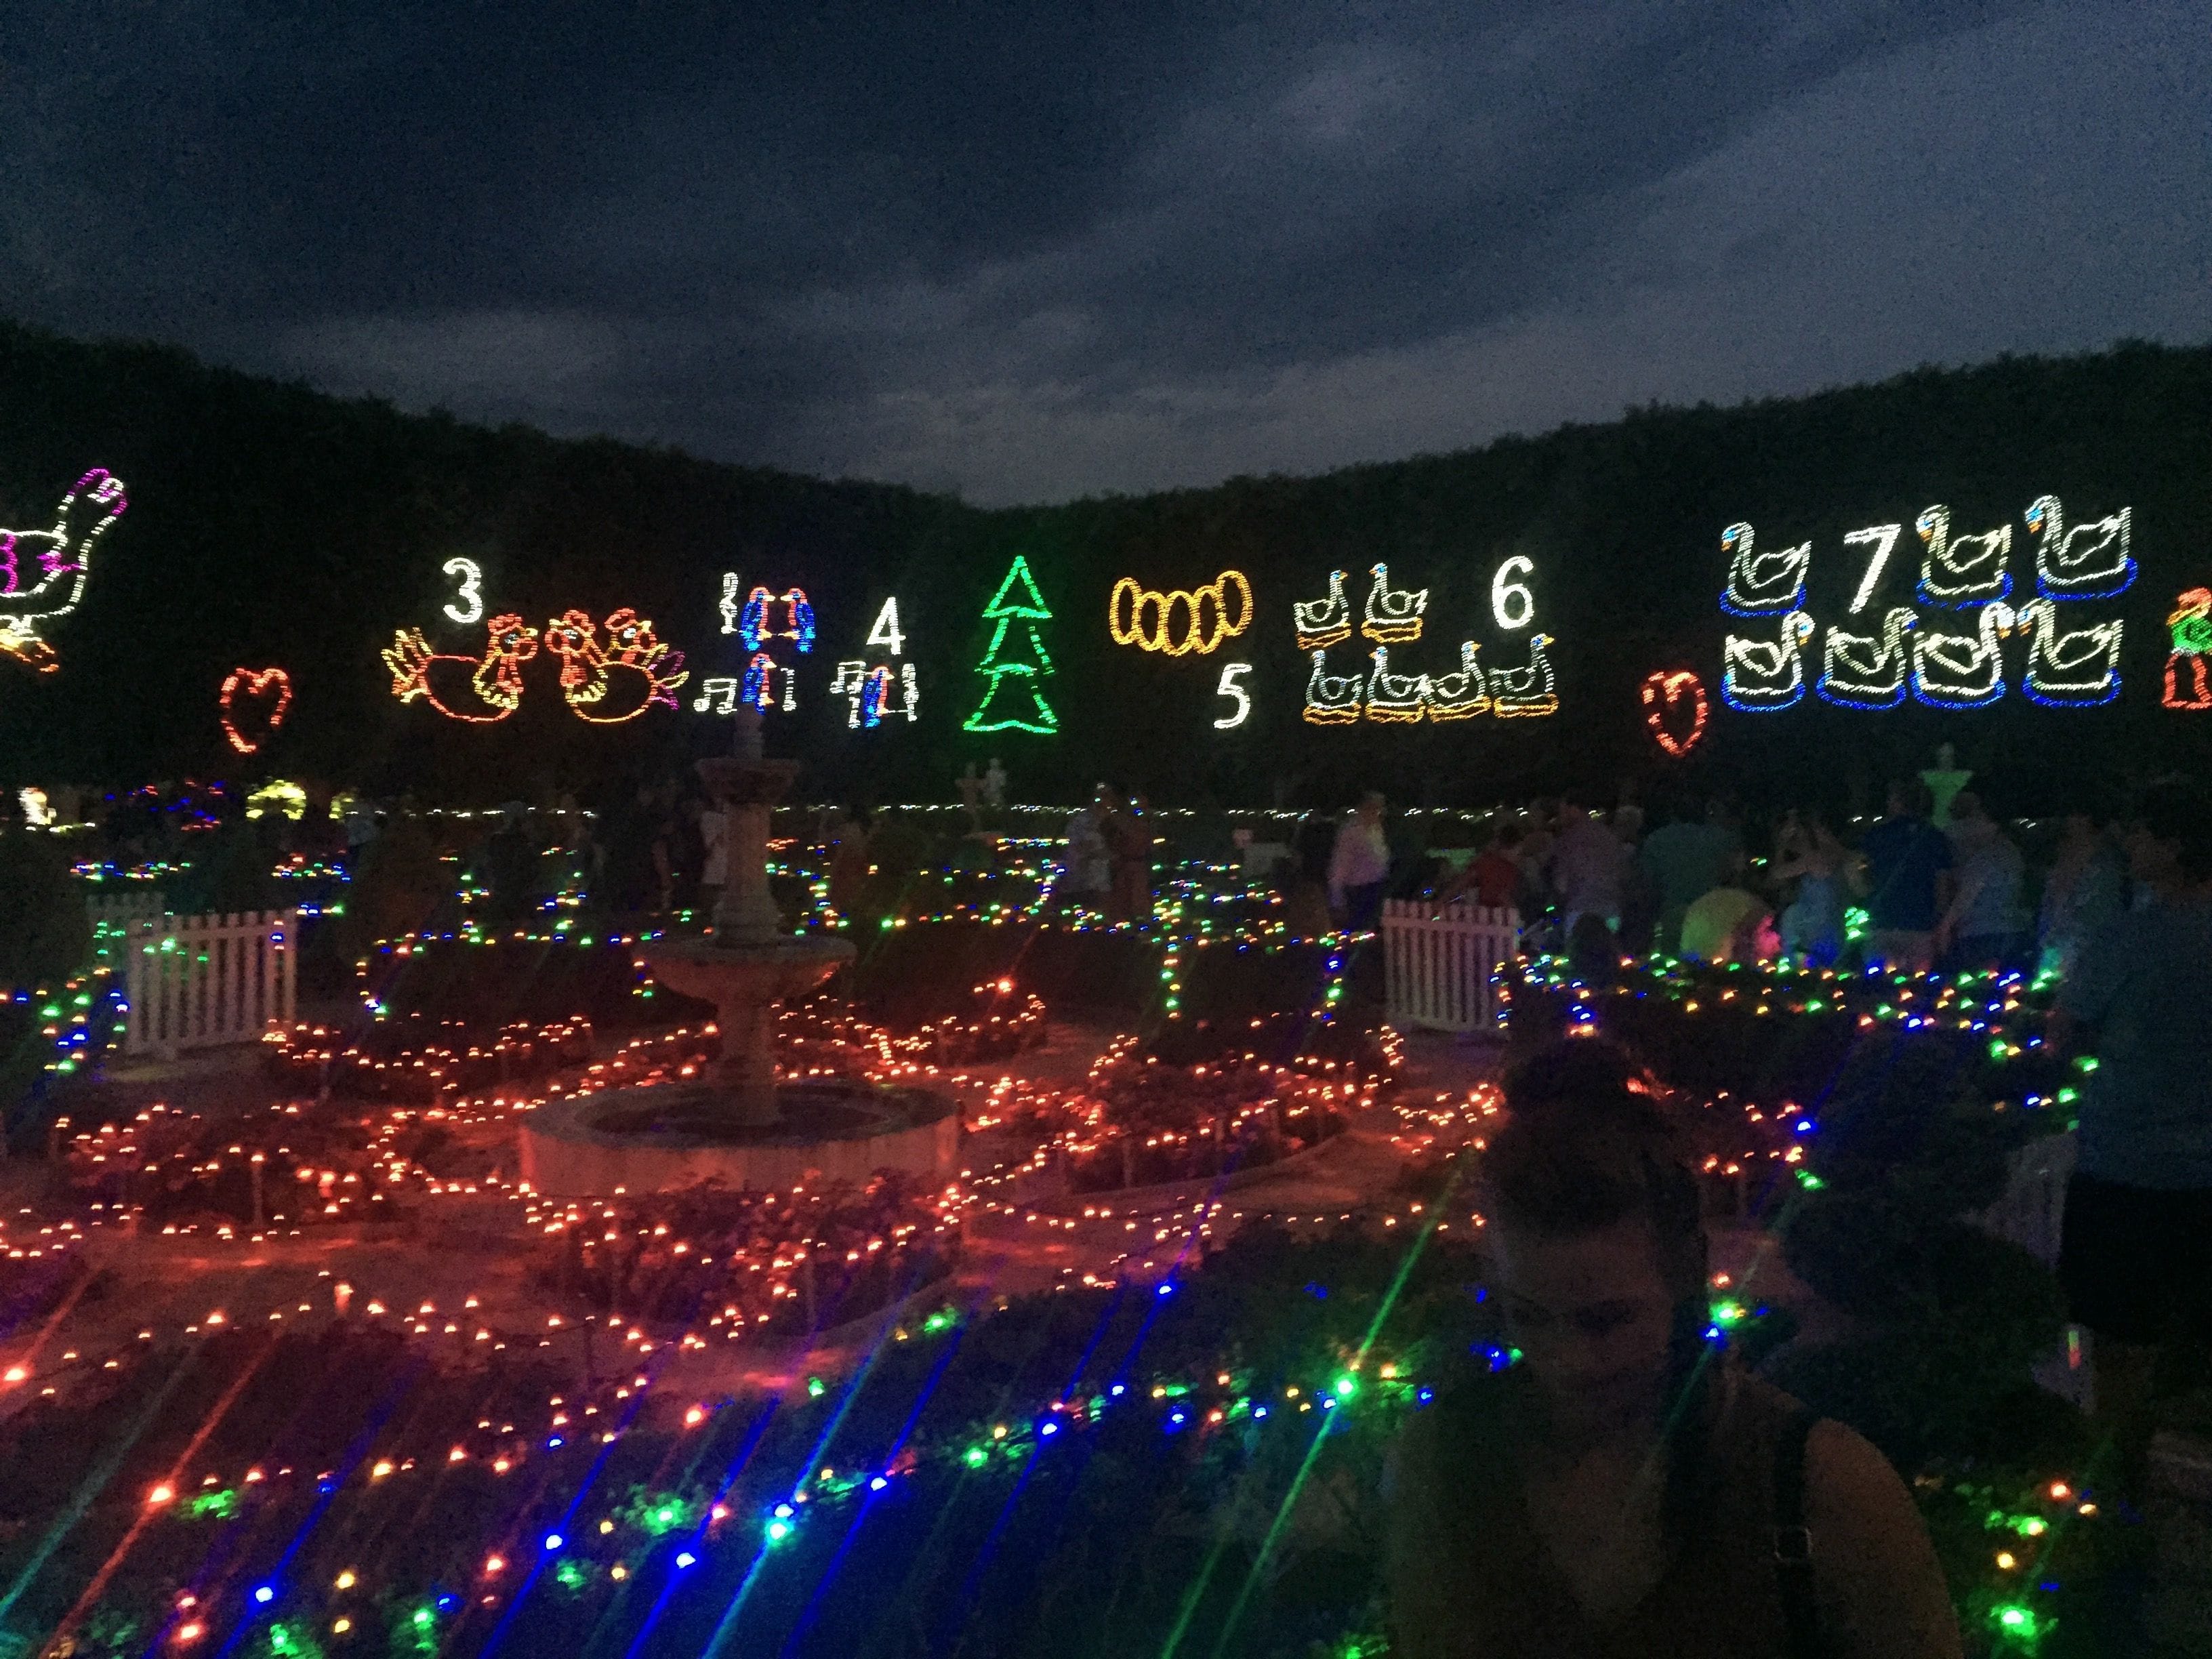 Hunter Valley Christmas Lights Spectacular Image -5b3abbba6a9d9